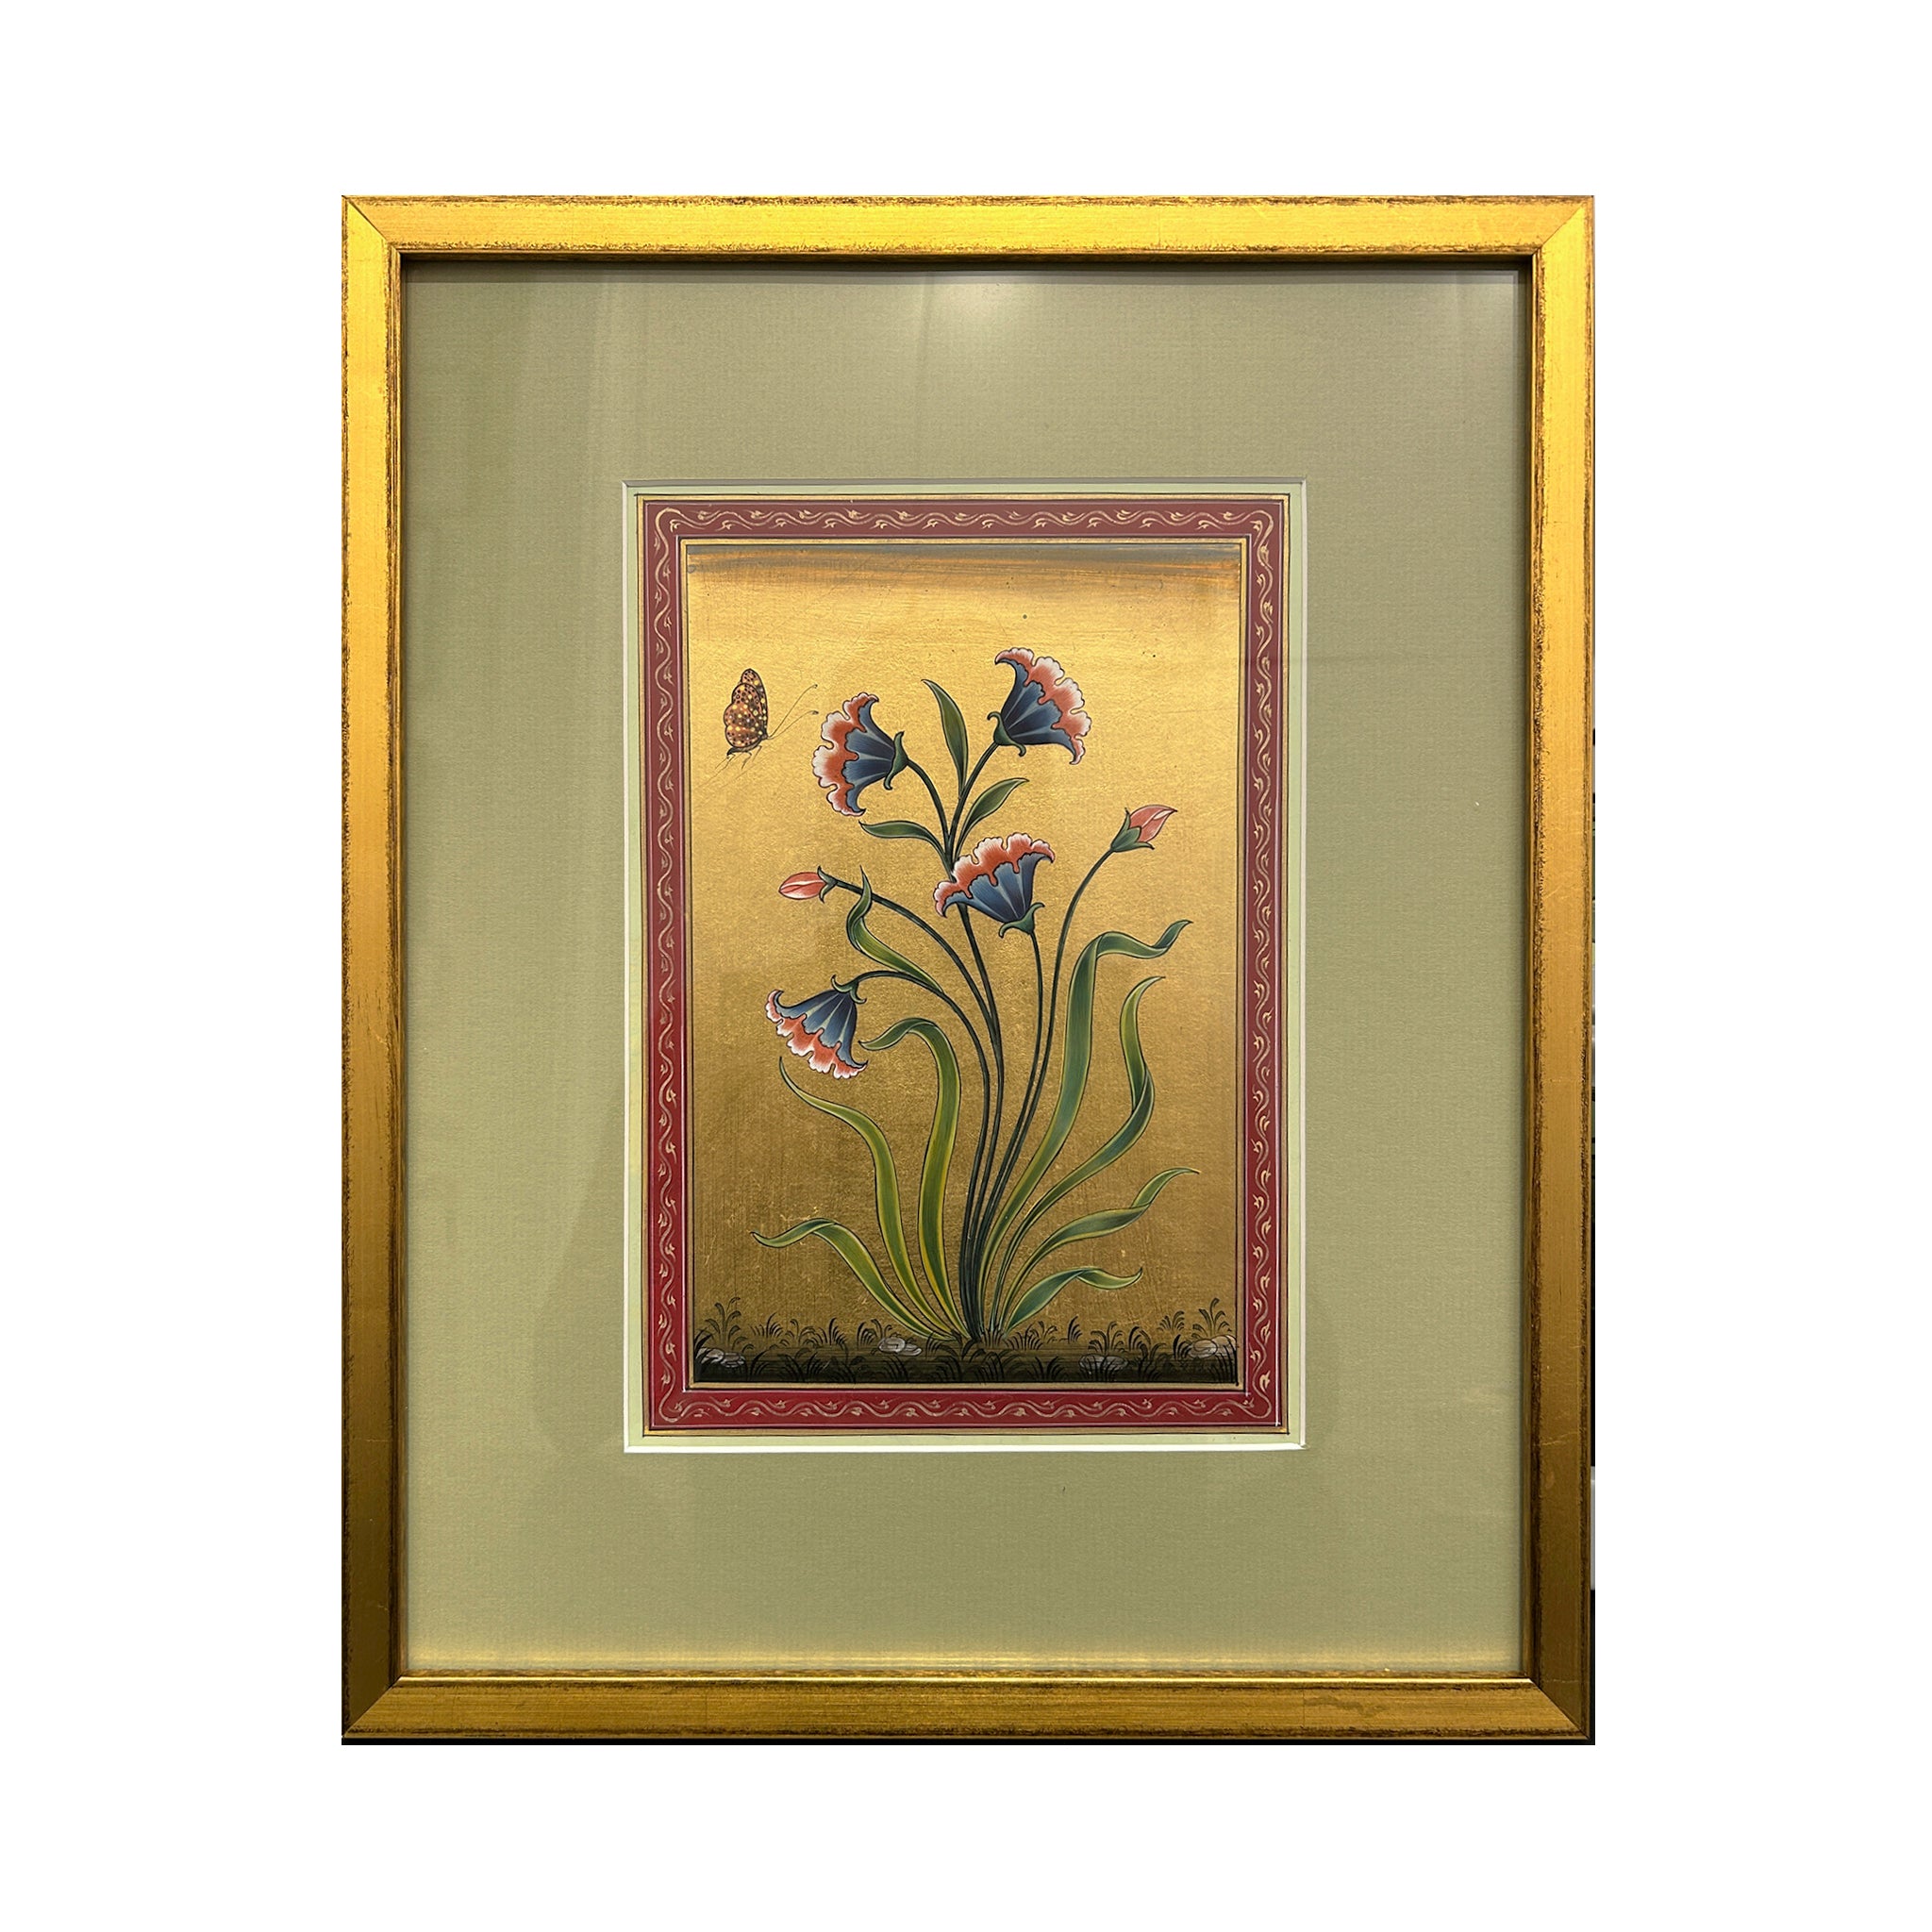 Hand-Painted Contemporary Indian Botanical Paintings